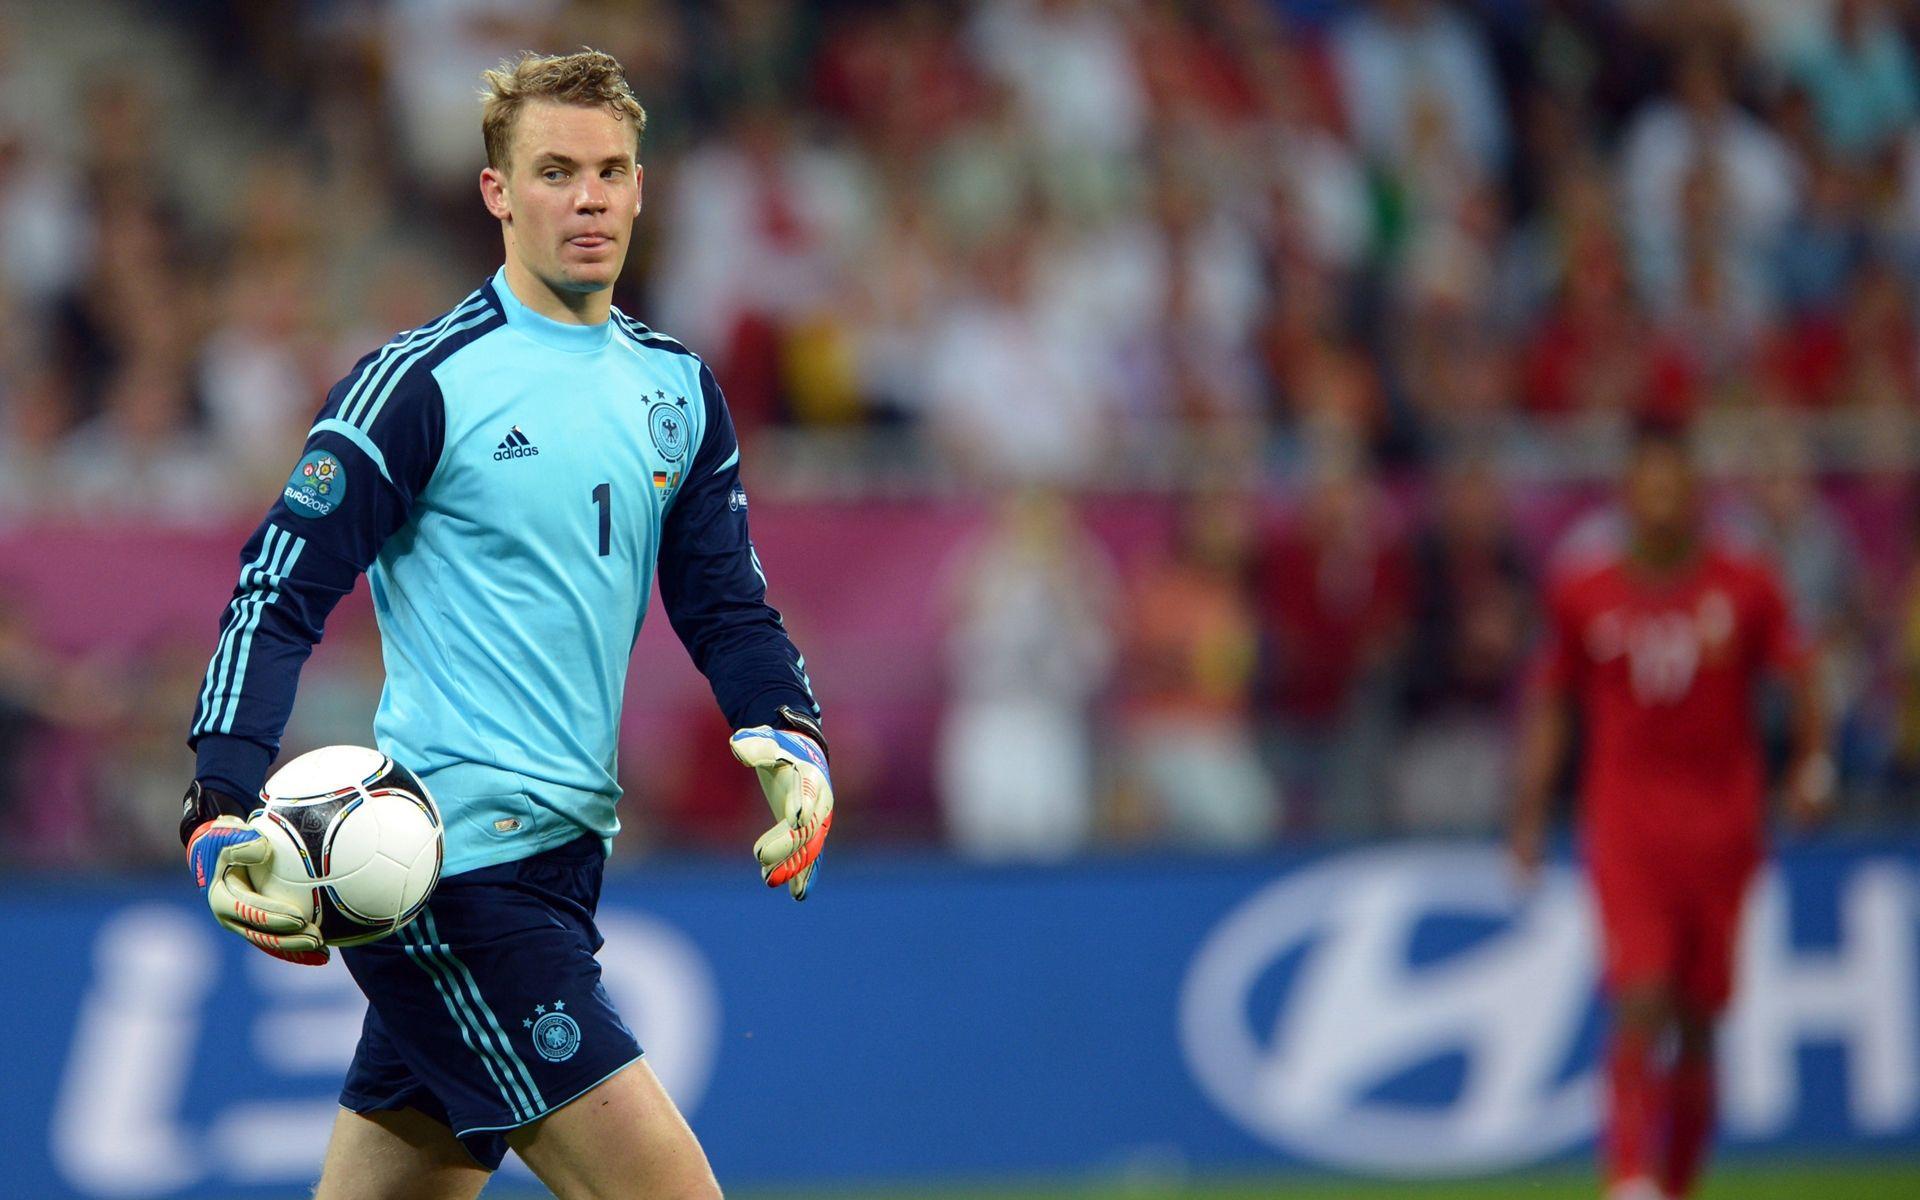 The football player of Bayern Manuel Neuer wallpaper and image